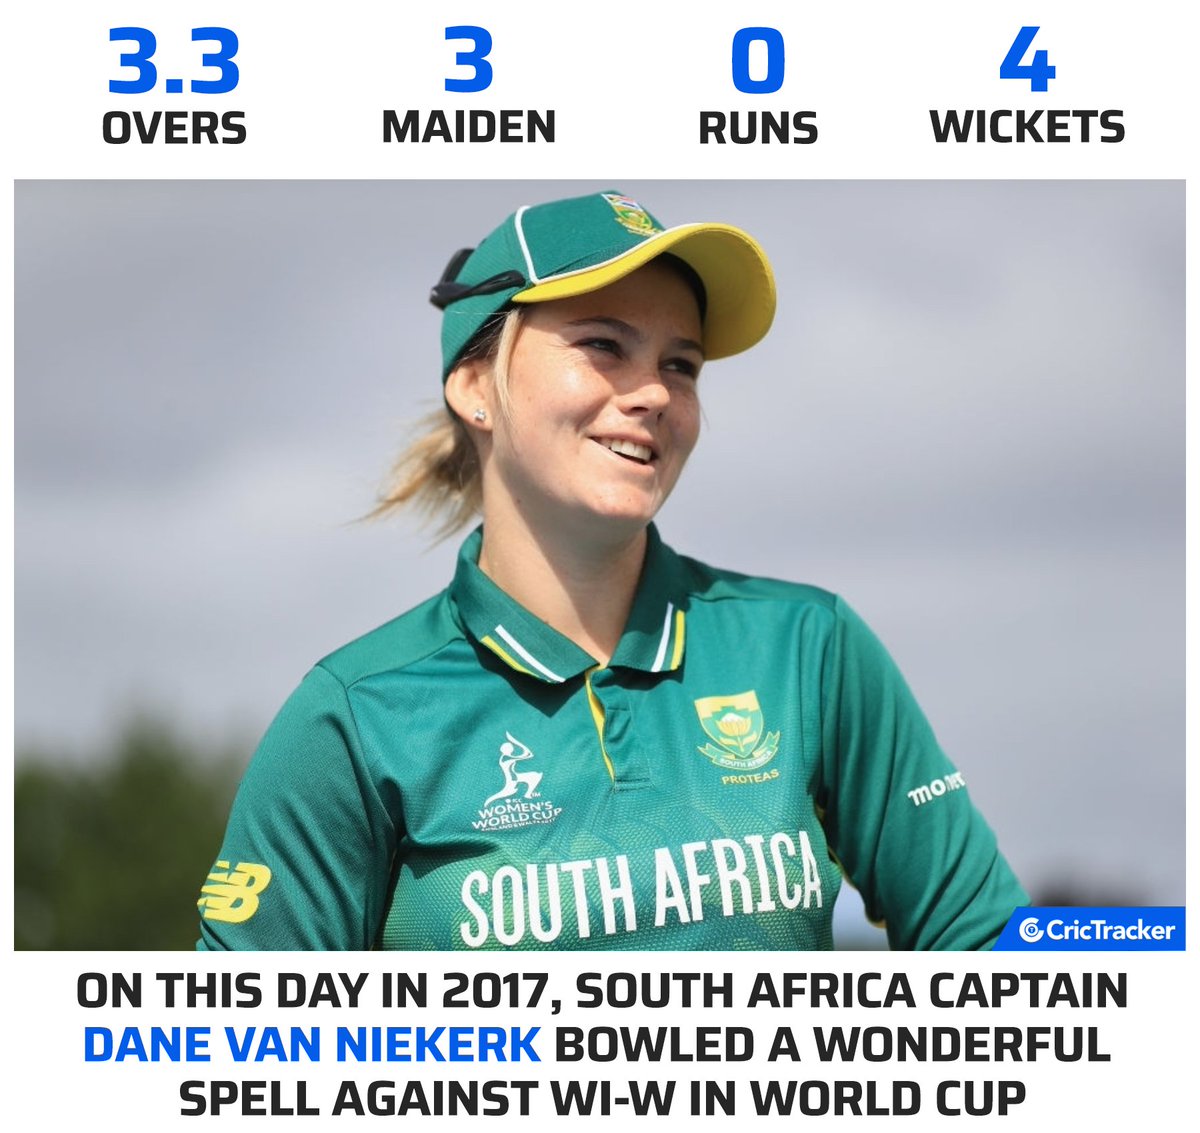 On this day in World Cup 2017, Dane van Niekerk helped SA women to beat WI women by 10 wickets.

#SAWvWIW #OnThisDay